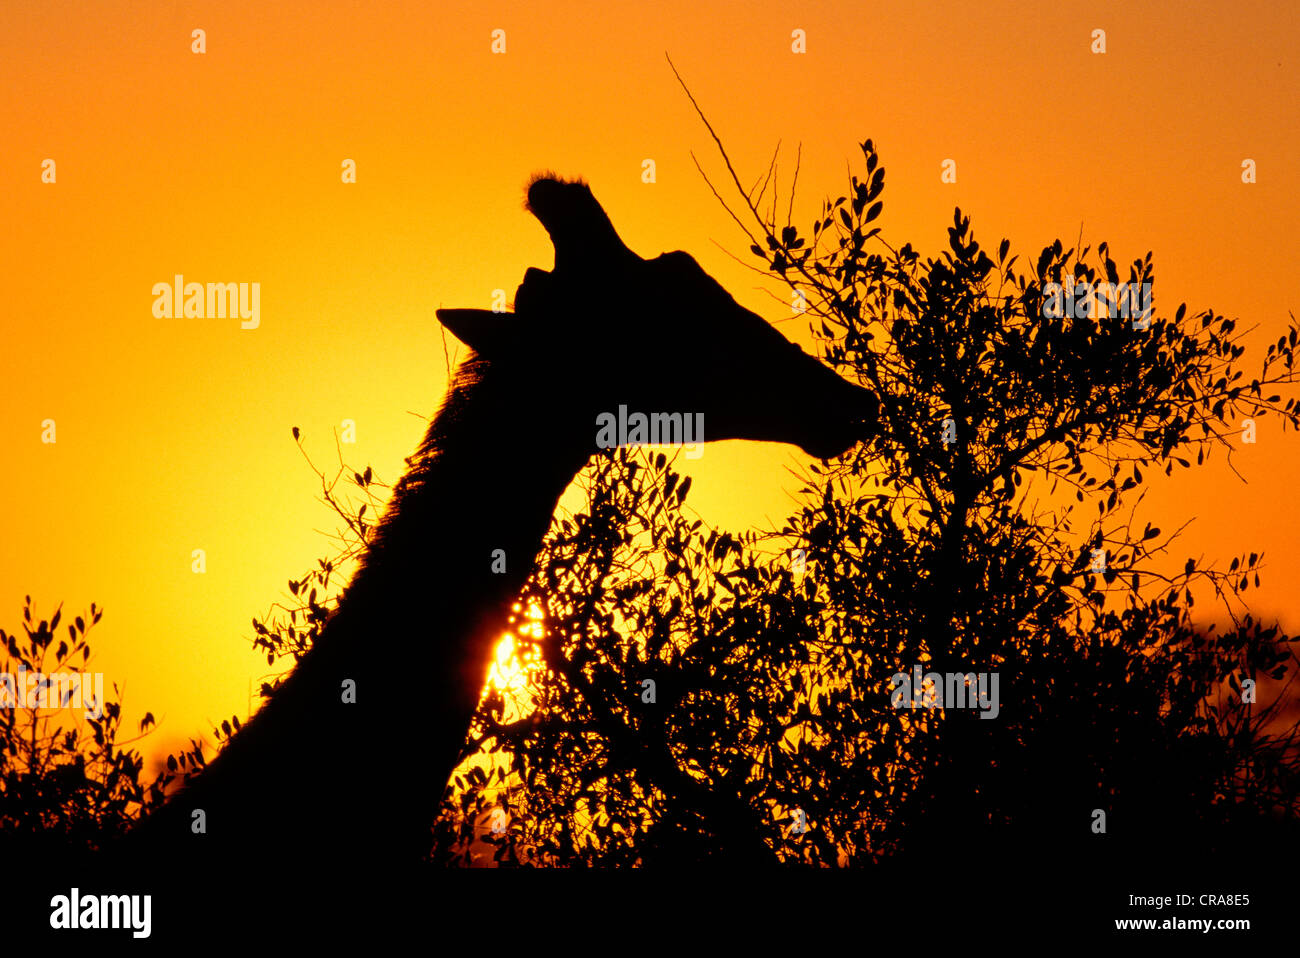 Giraffe (Giraffa camelopardalis), in front of the sunset, Kruger National Park, South Africa, Africa Stock Photo